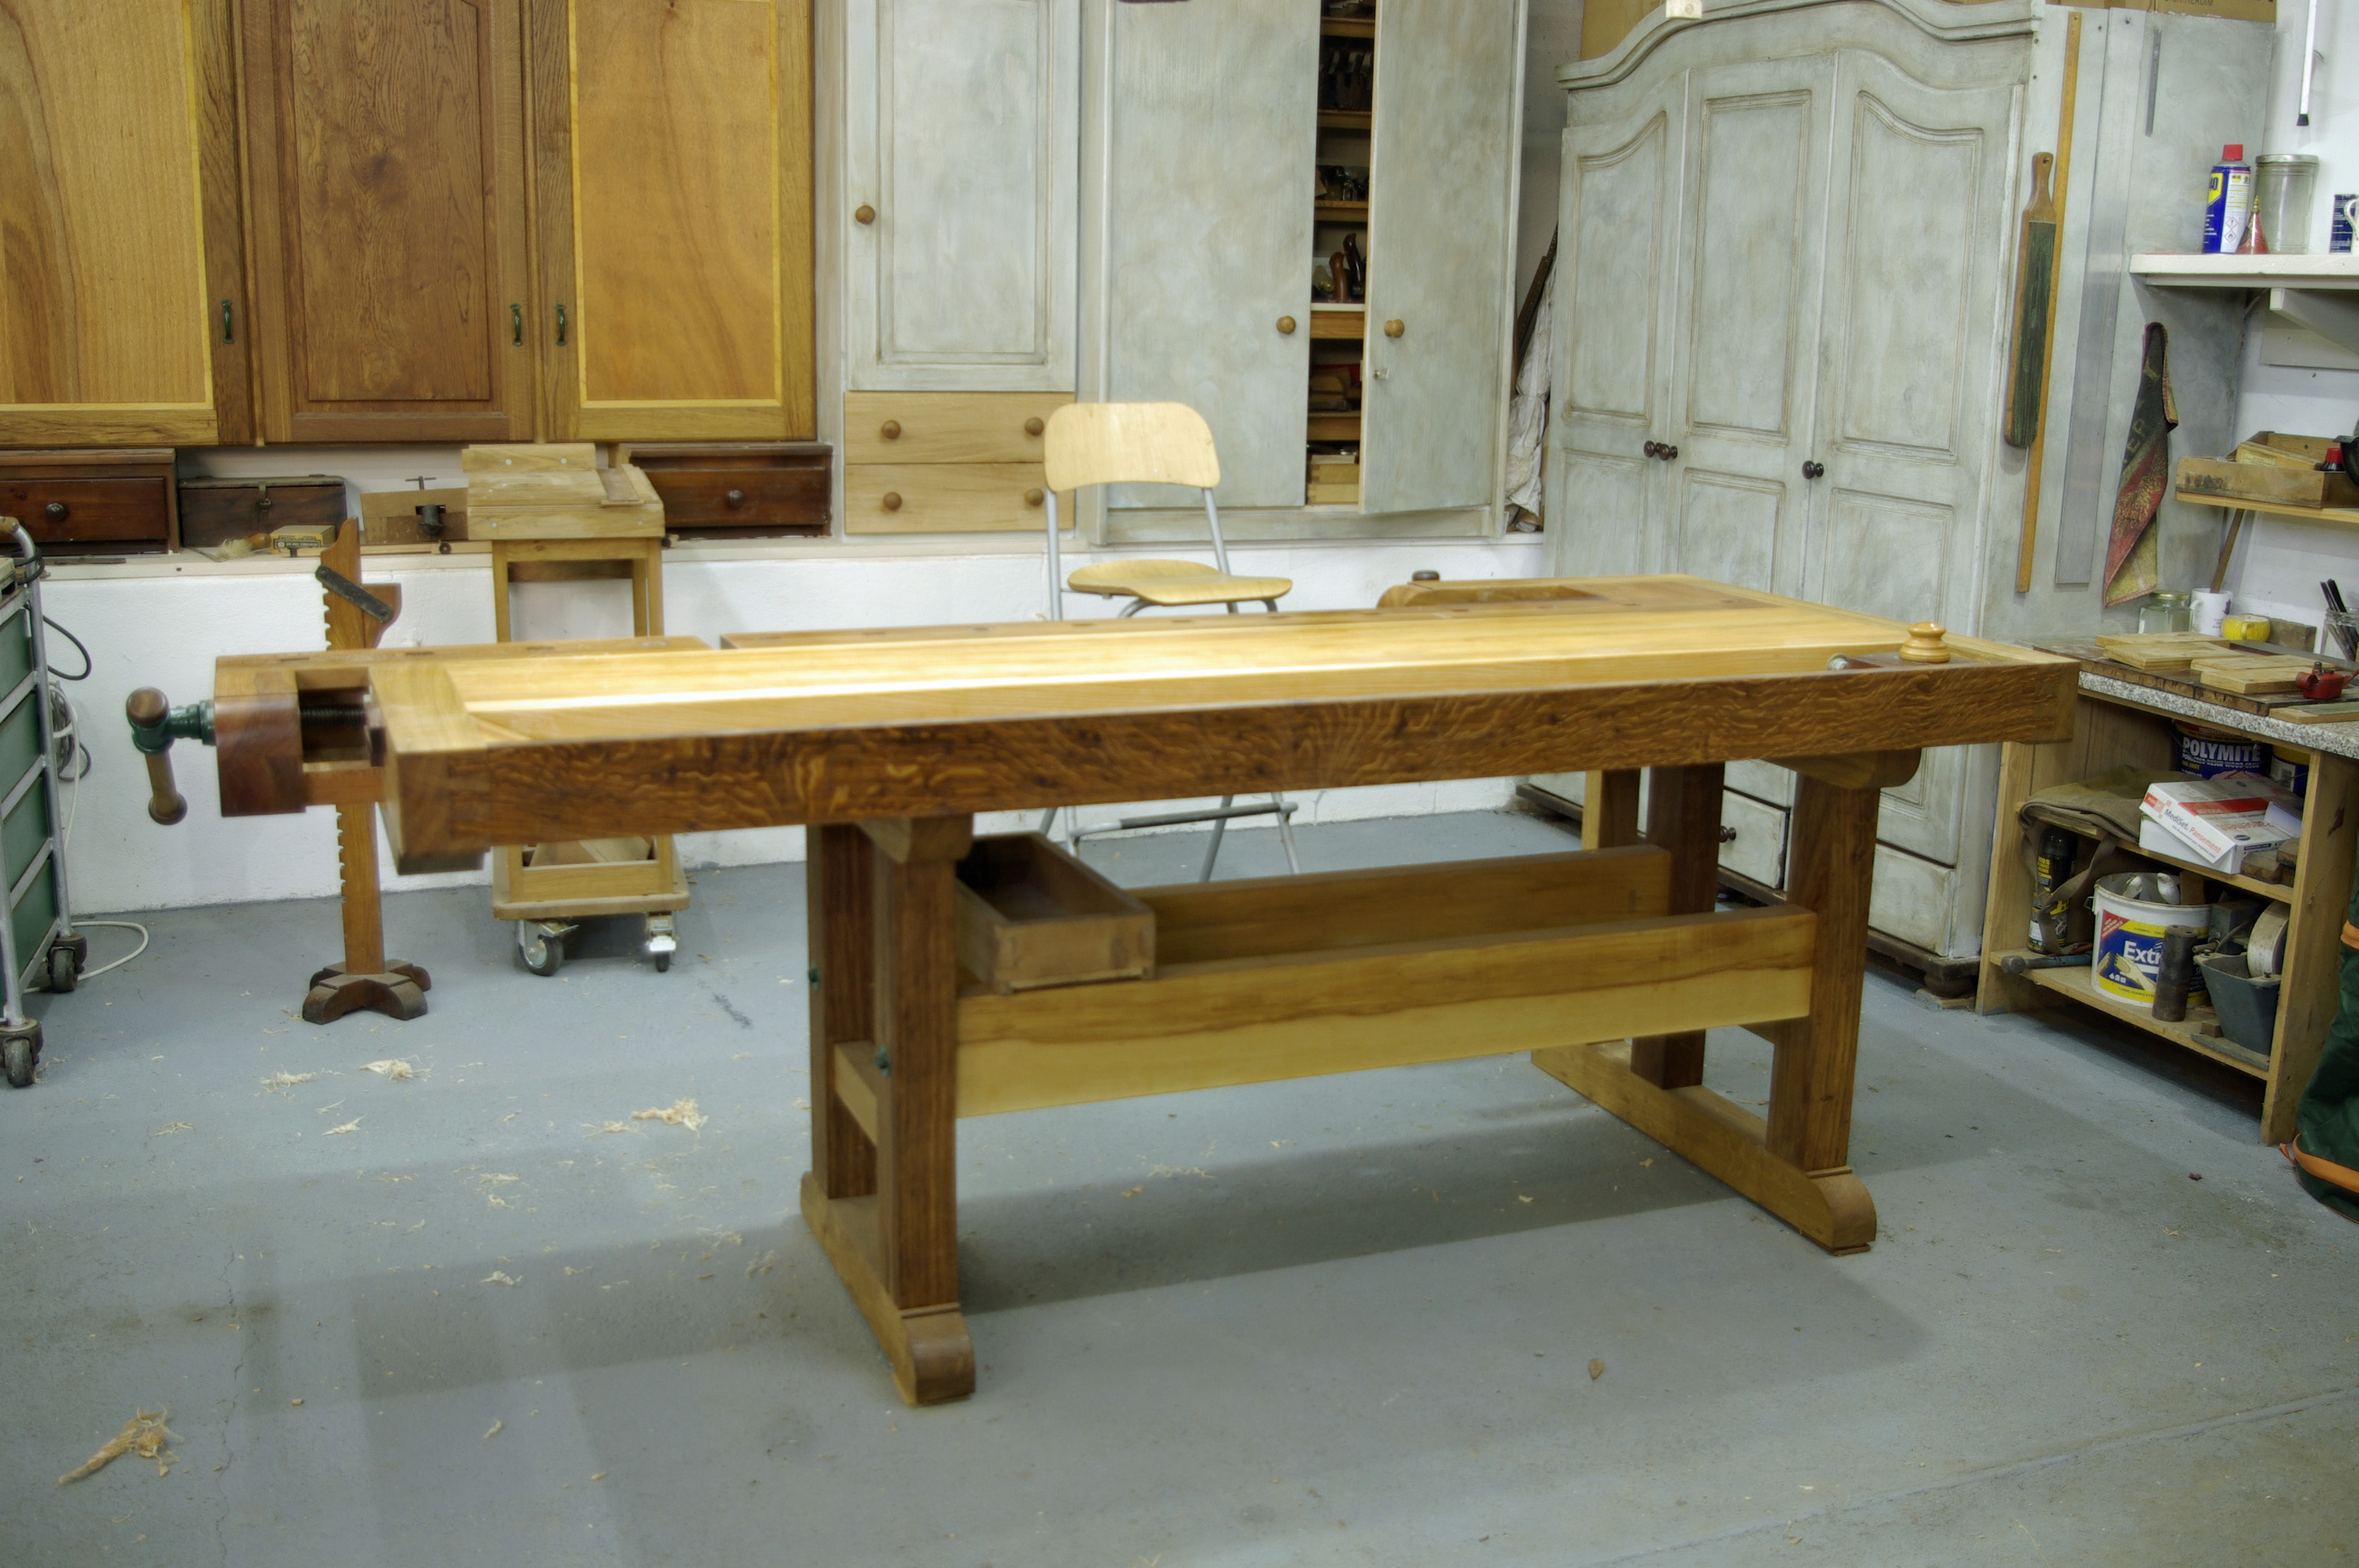 http://www.traditional-woodworker.com/wp-content/uploads/2020/01/Bench-finished-front.jpg